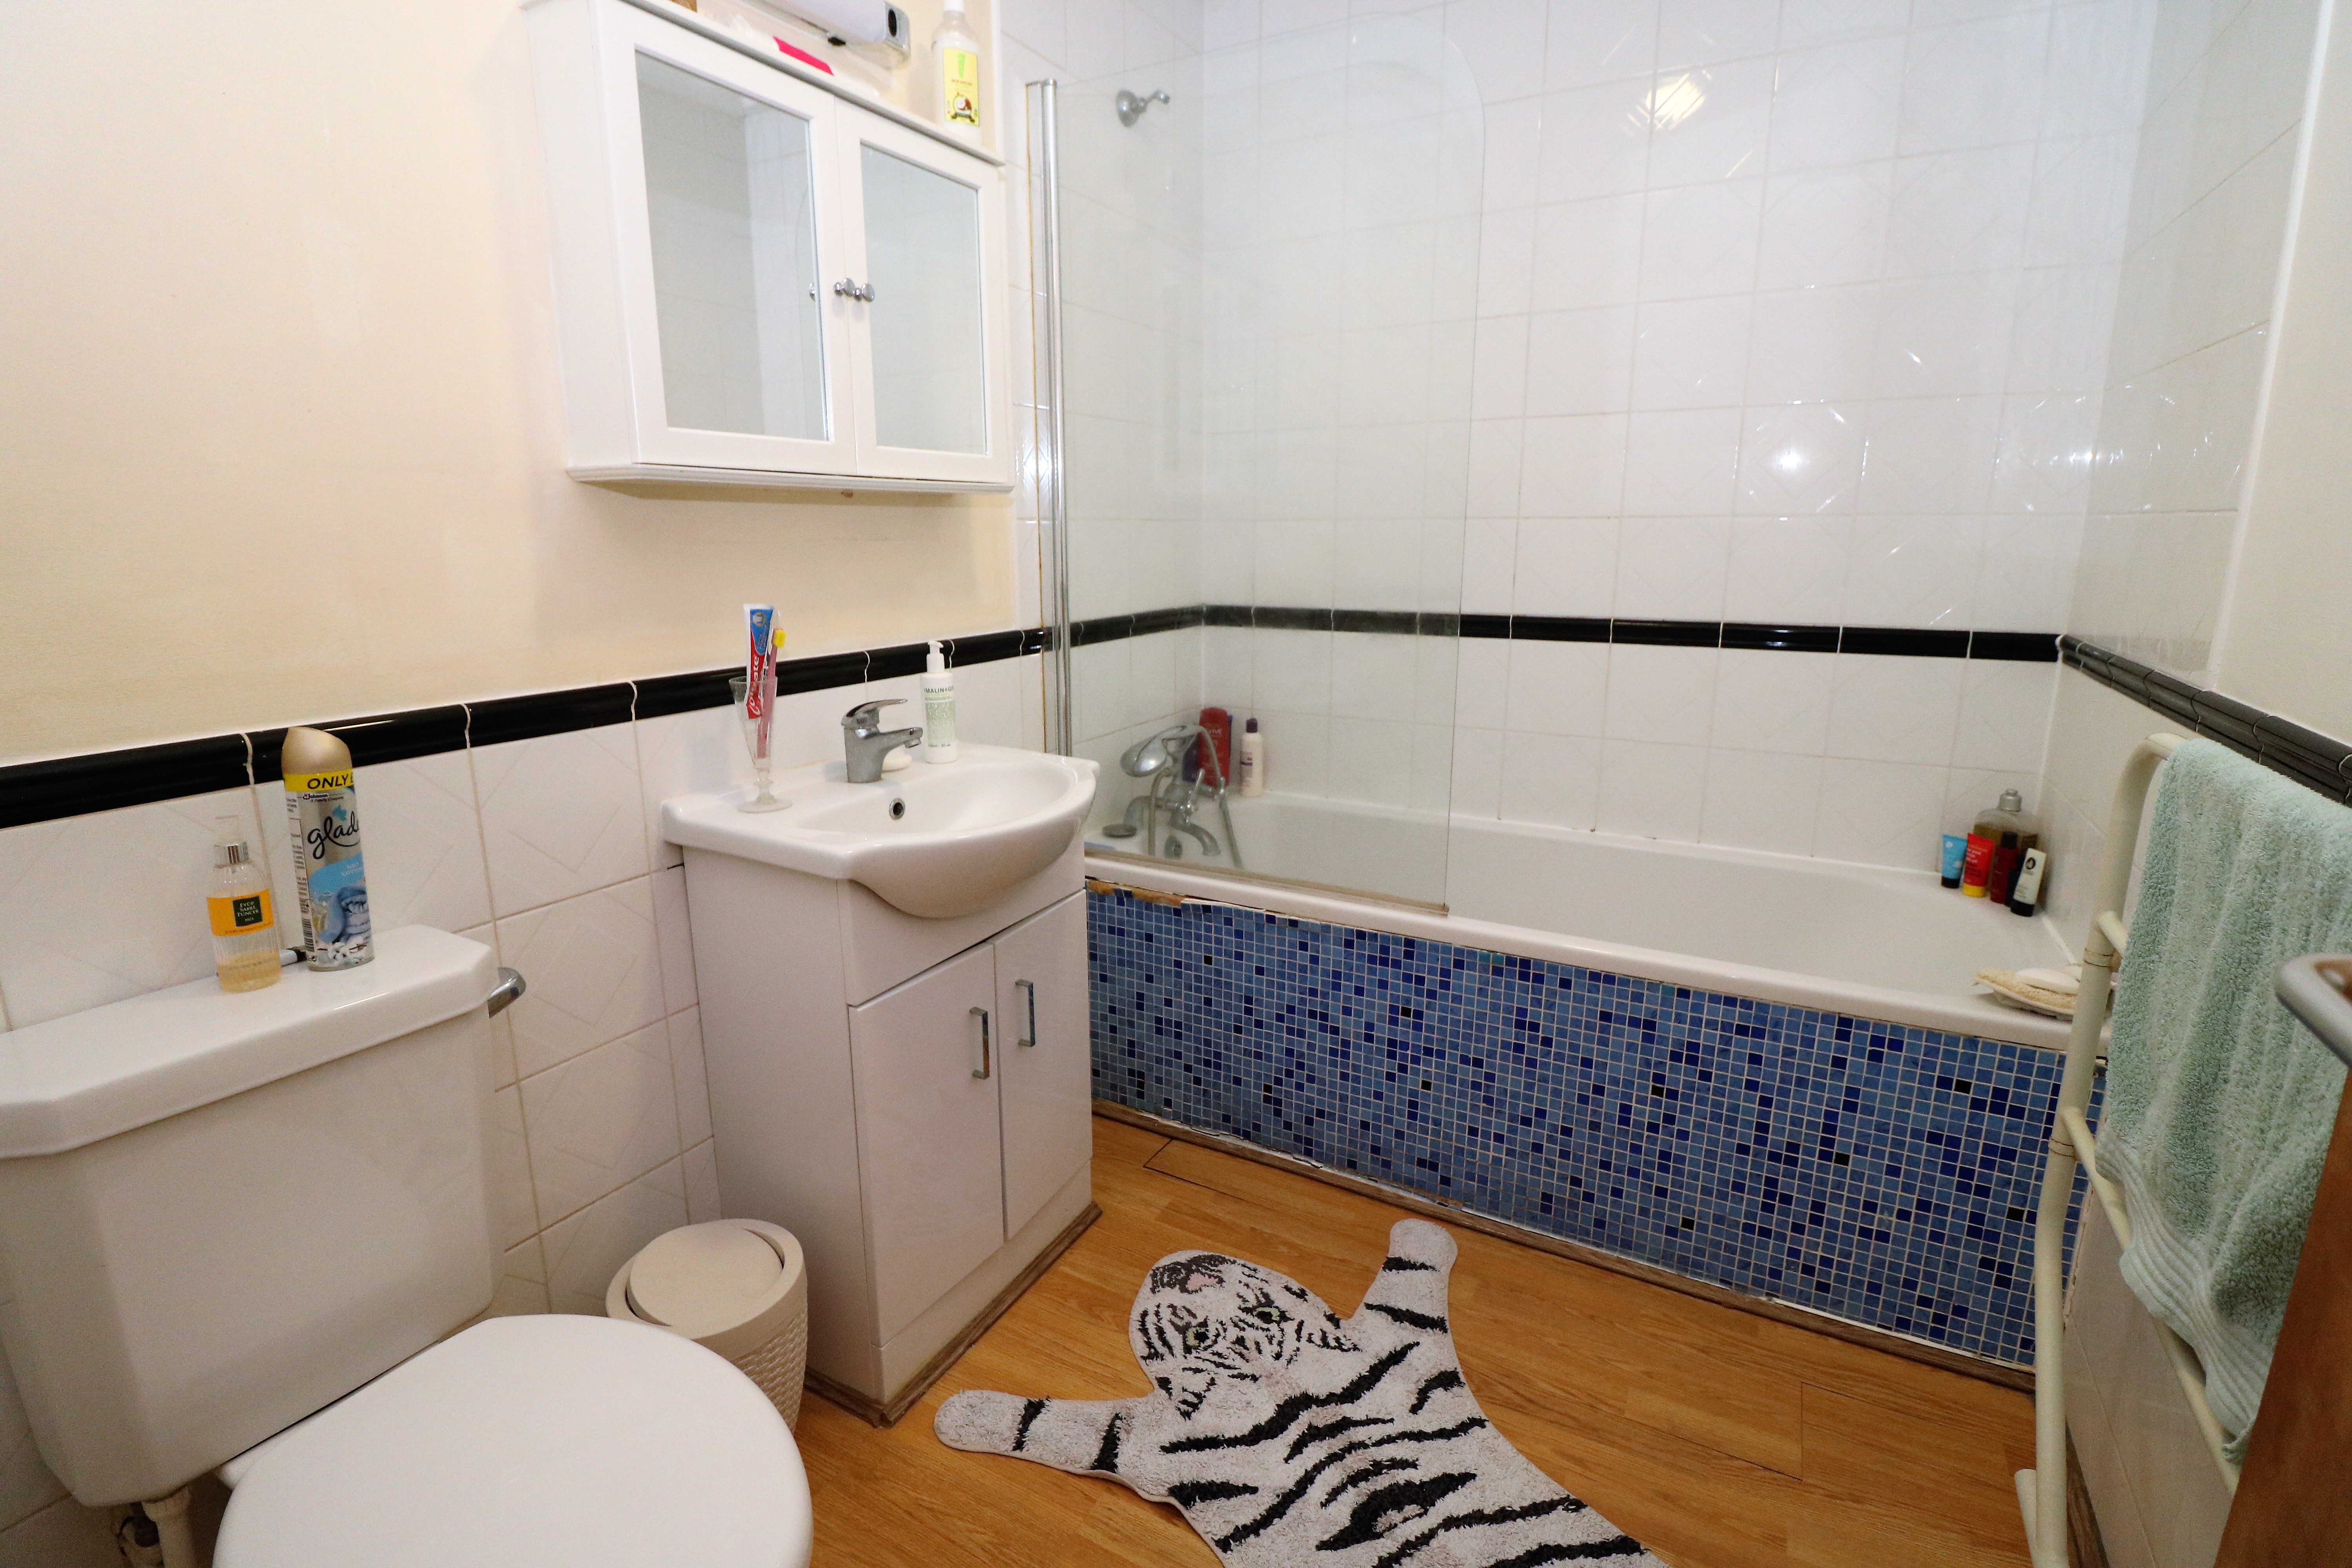 Spacious third floor one bed apartment near Old Street, EC1V.